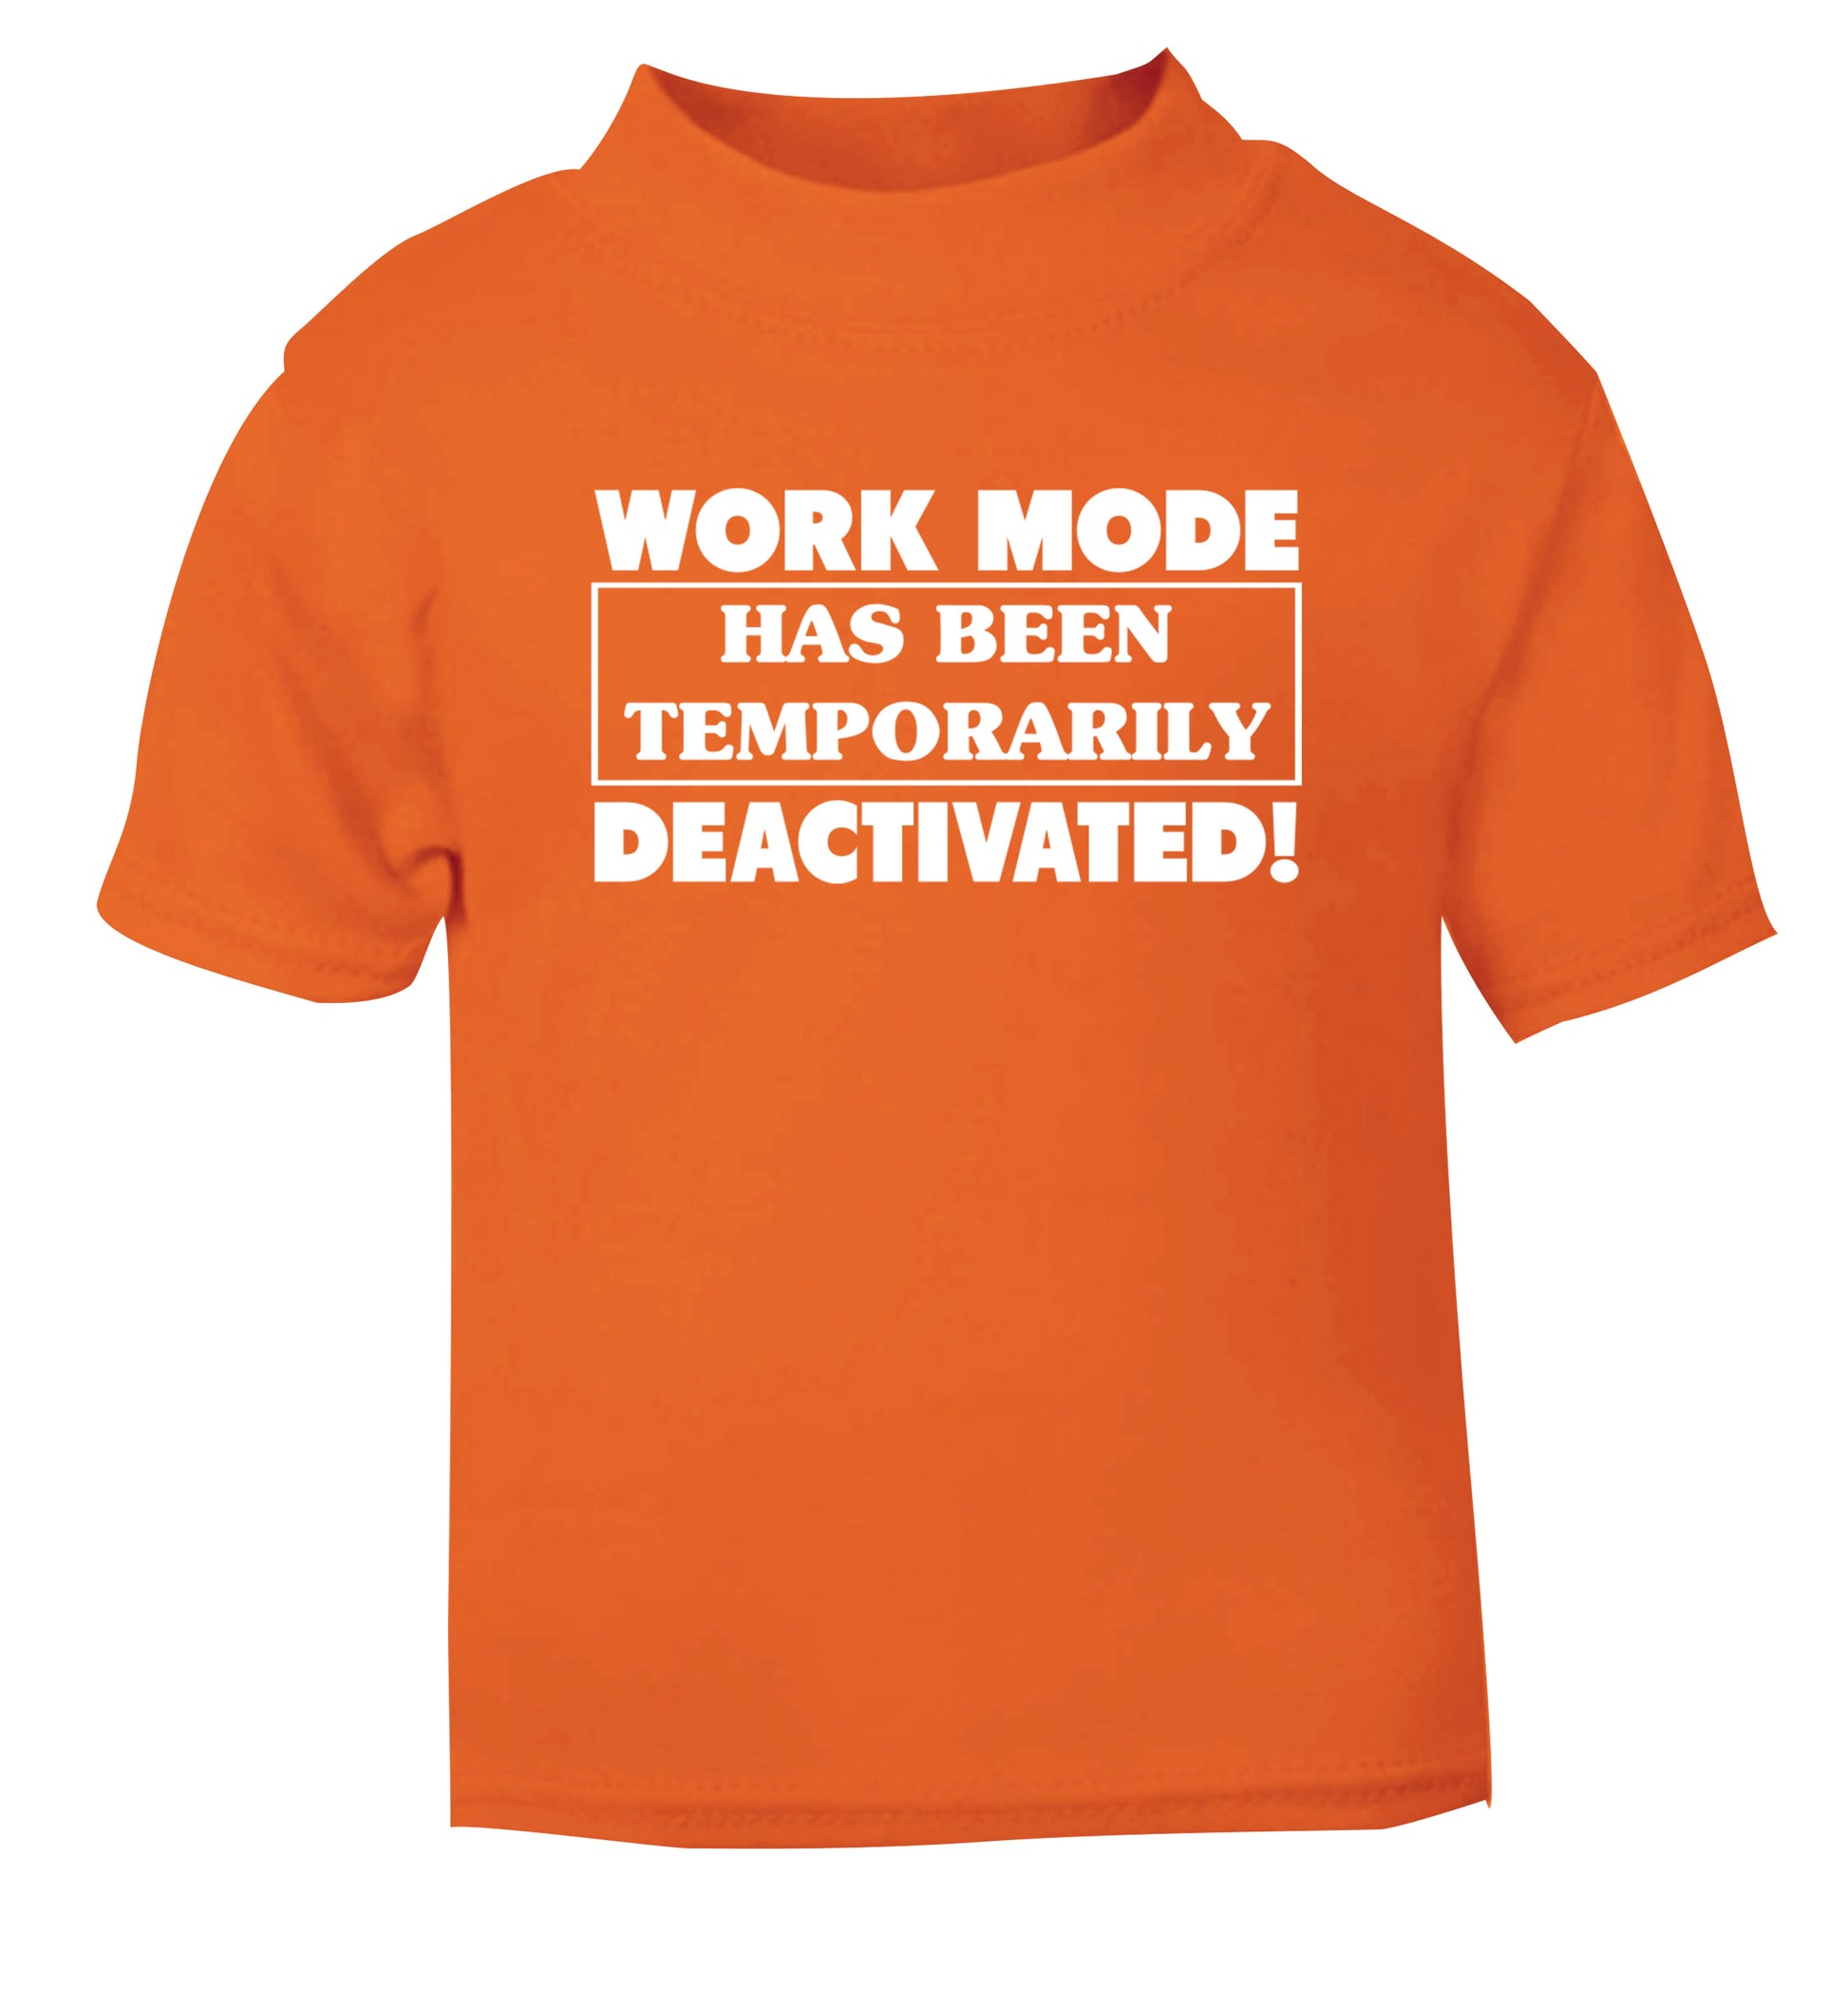 Work mode has now been temporarily deactivated orange Baby Toddler Tshirt 2 Years